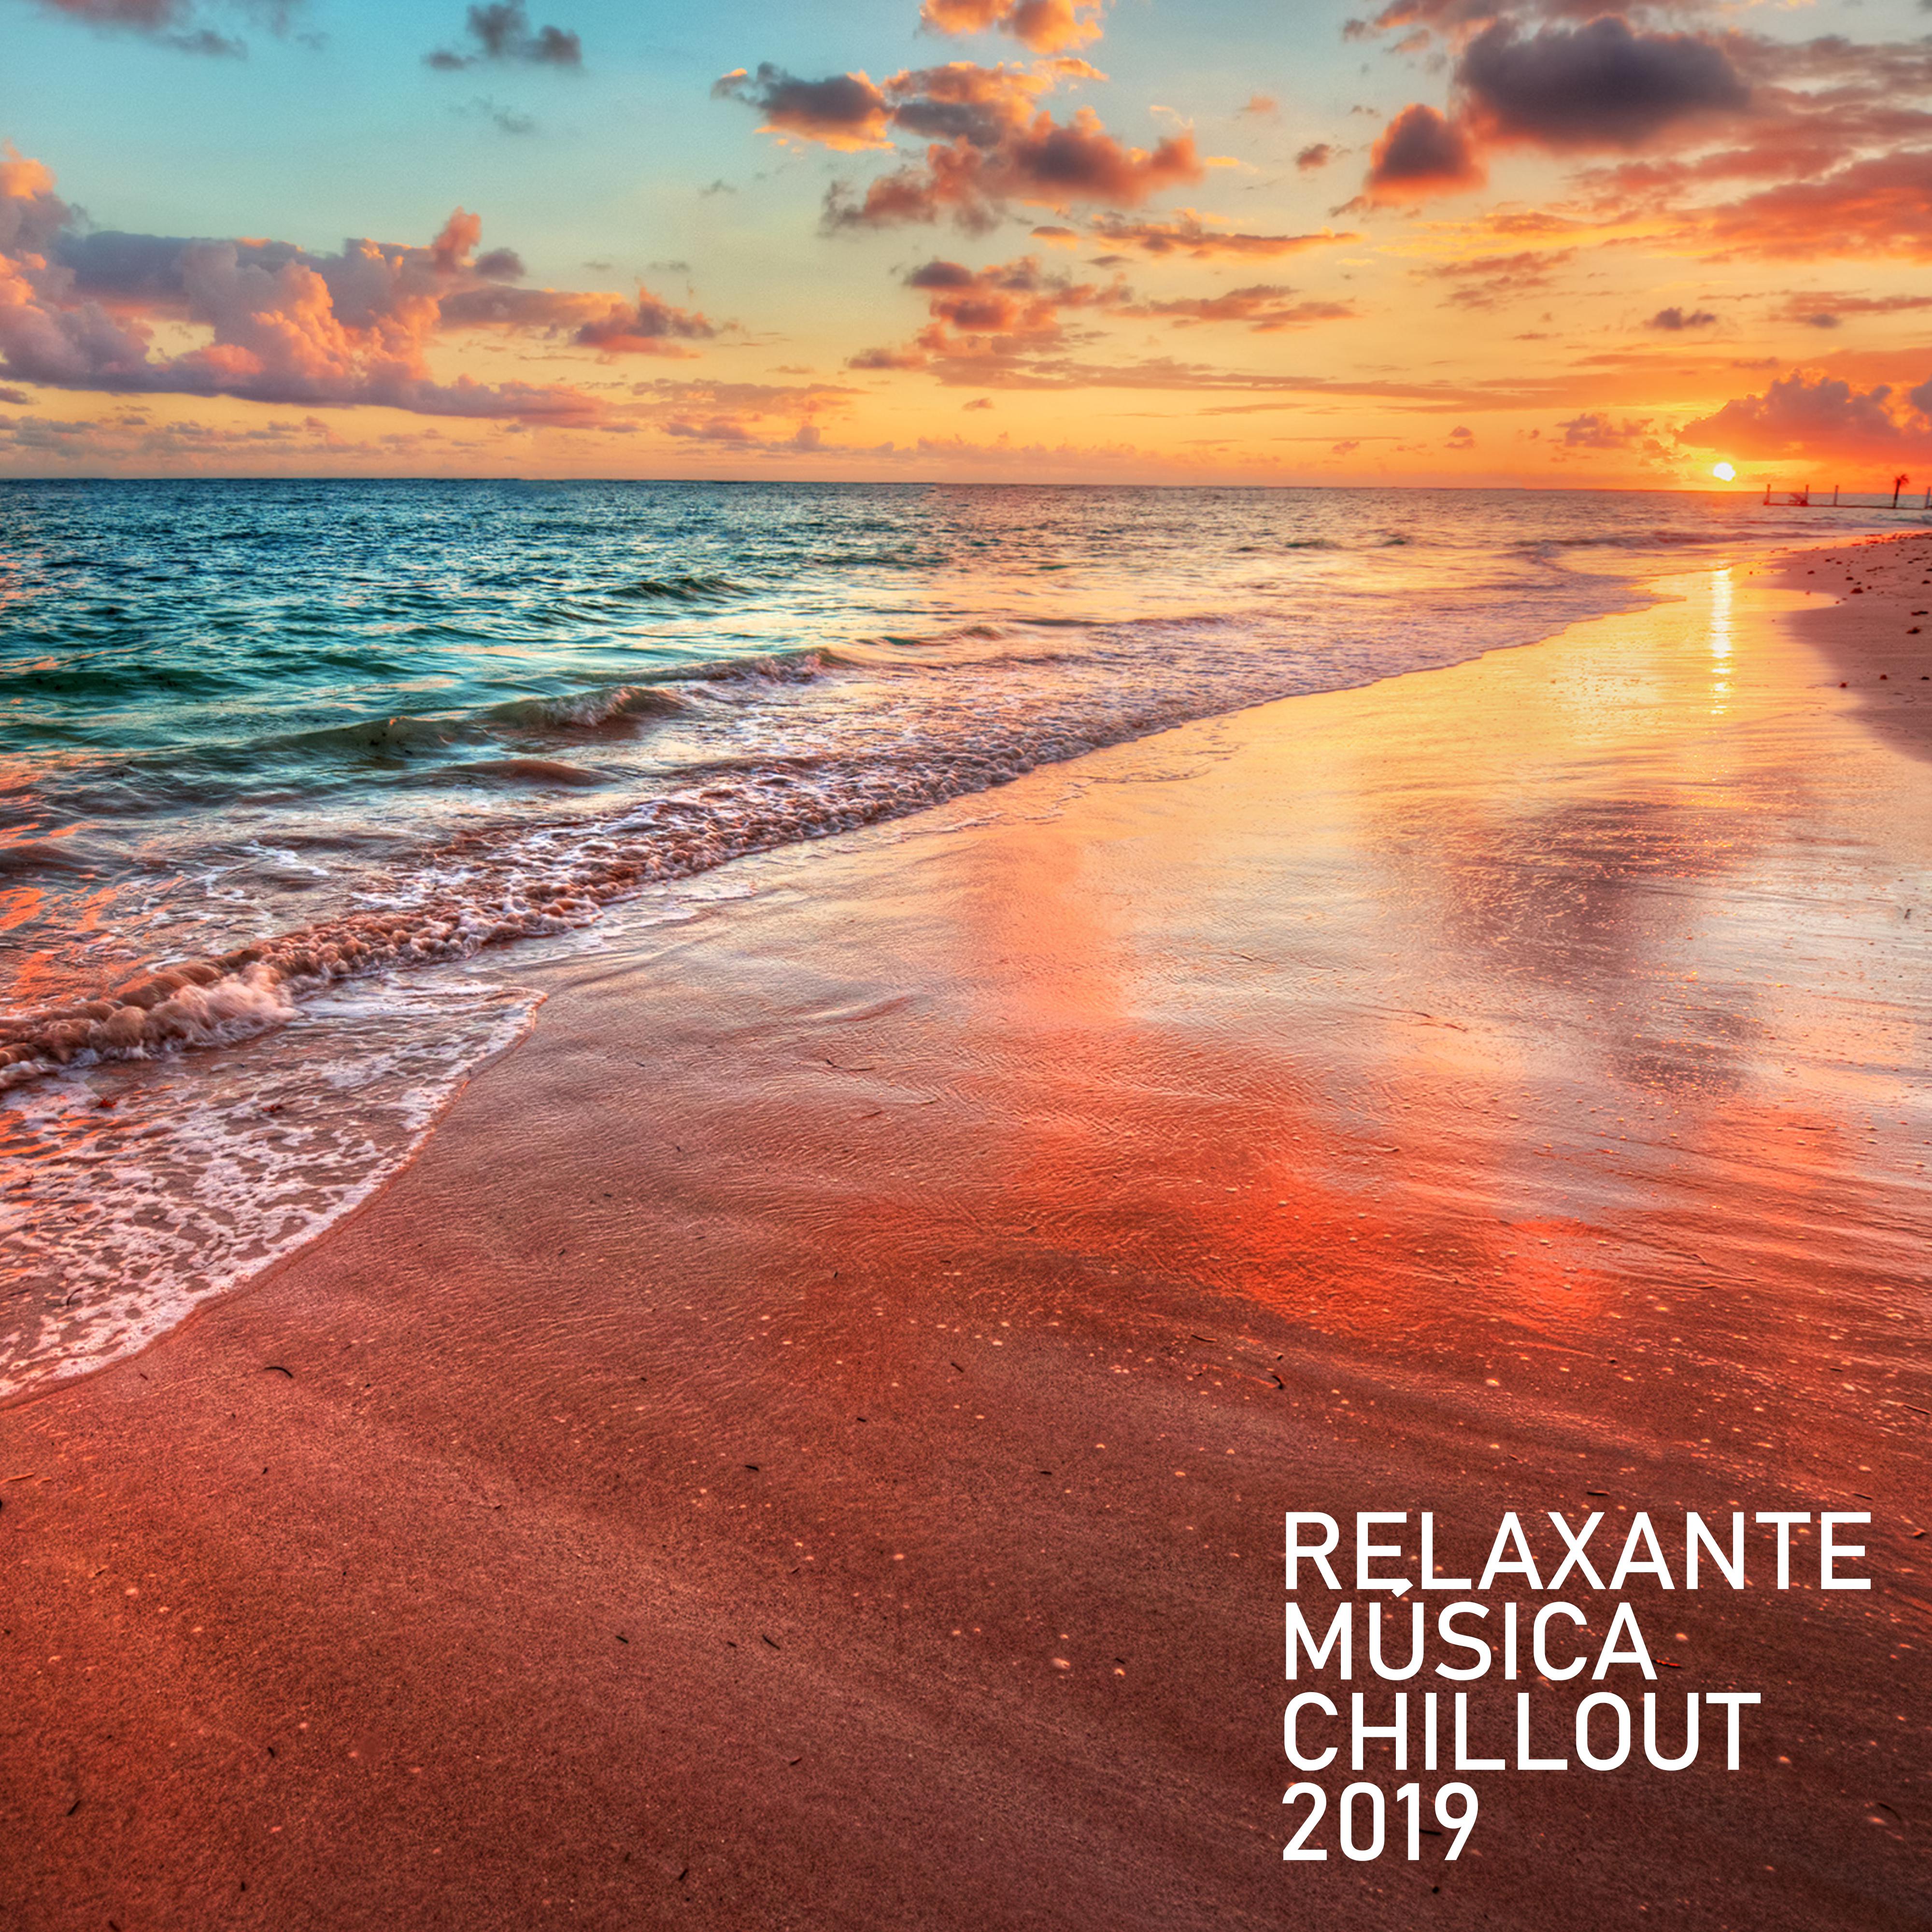 Relaxante Música Chillout 2019